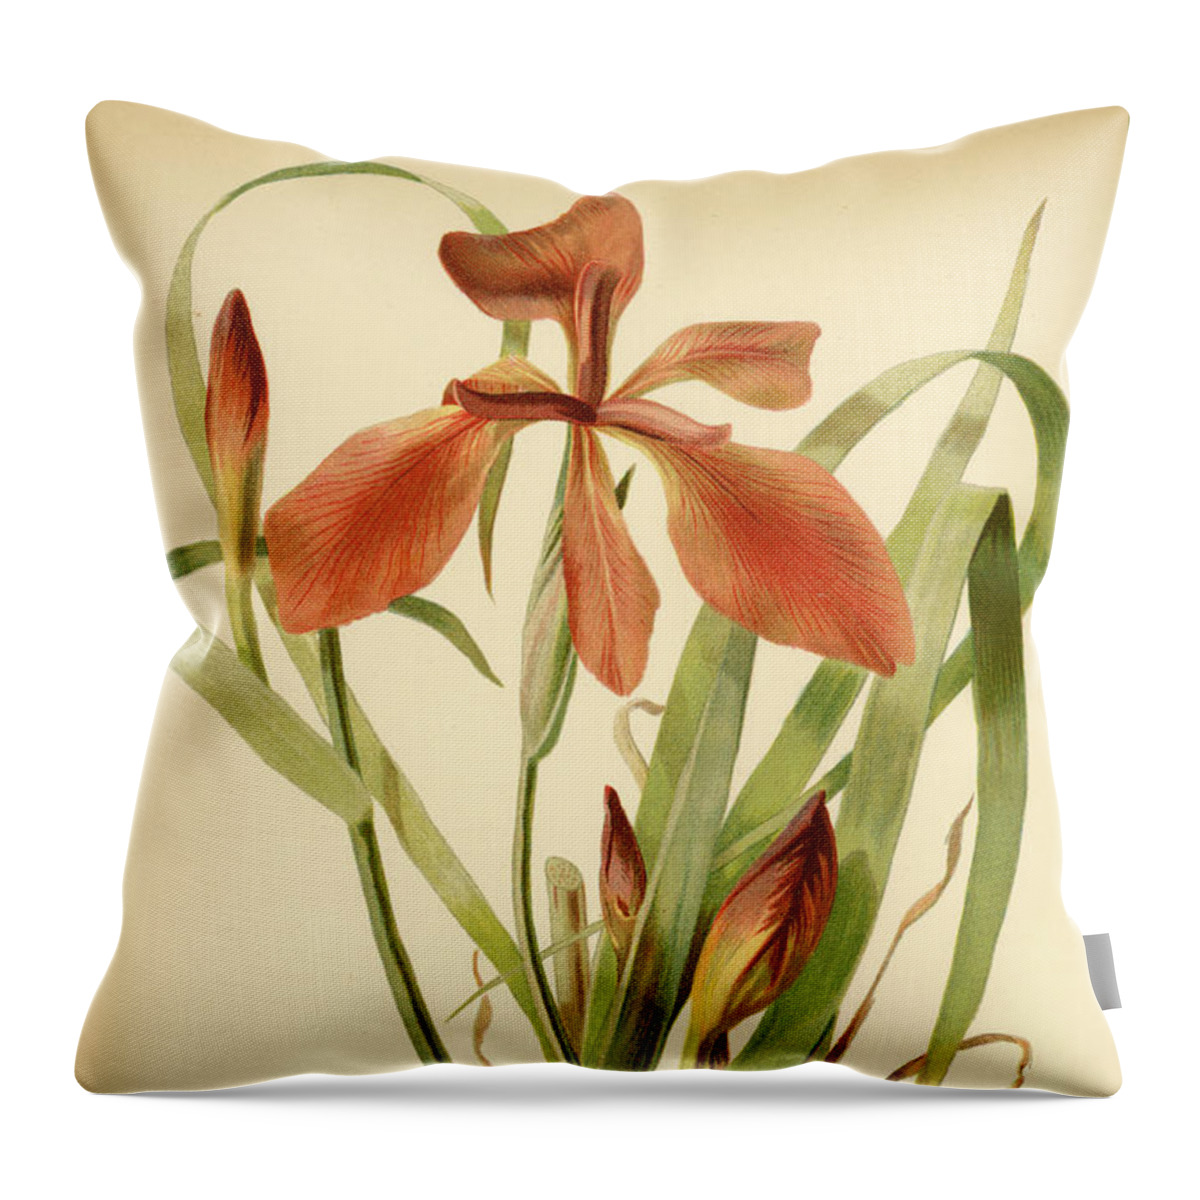 Iris Throw Pillow featuring the mixed media Iris Cuprea Copper Iris. by Unknown